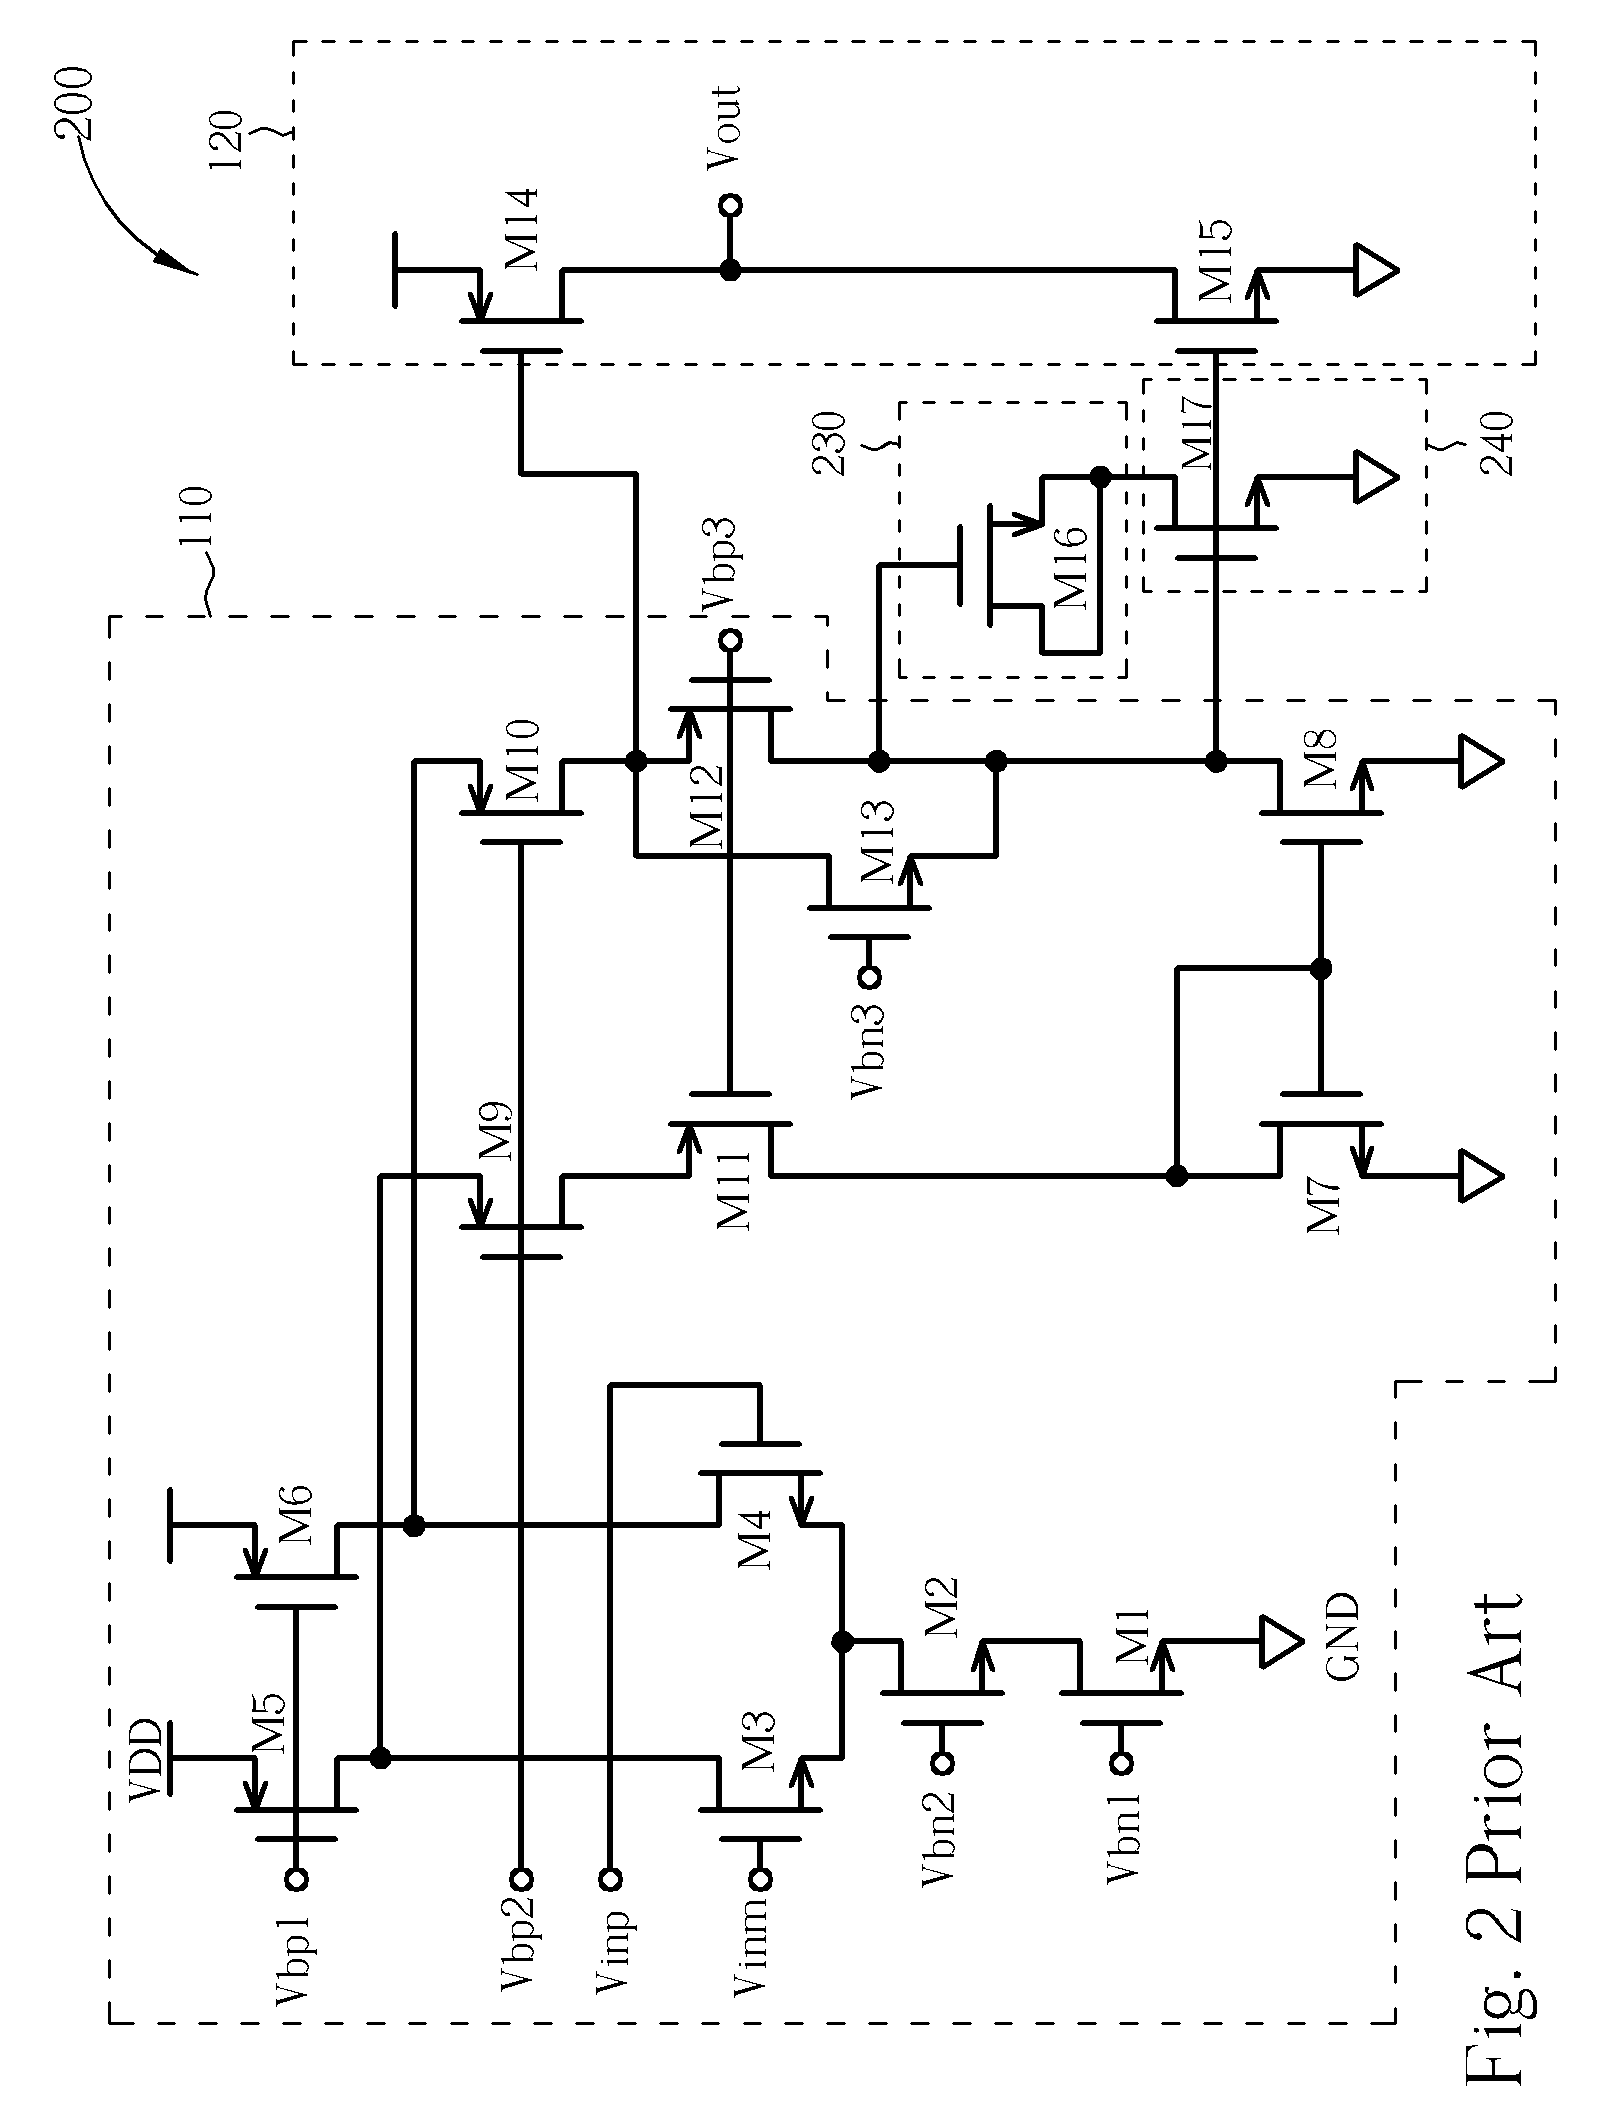 Amplifier circuit having a compensation circuit coupled to an output node of an operational amplifier for improving loop stability